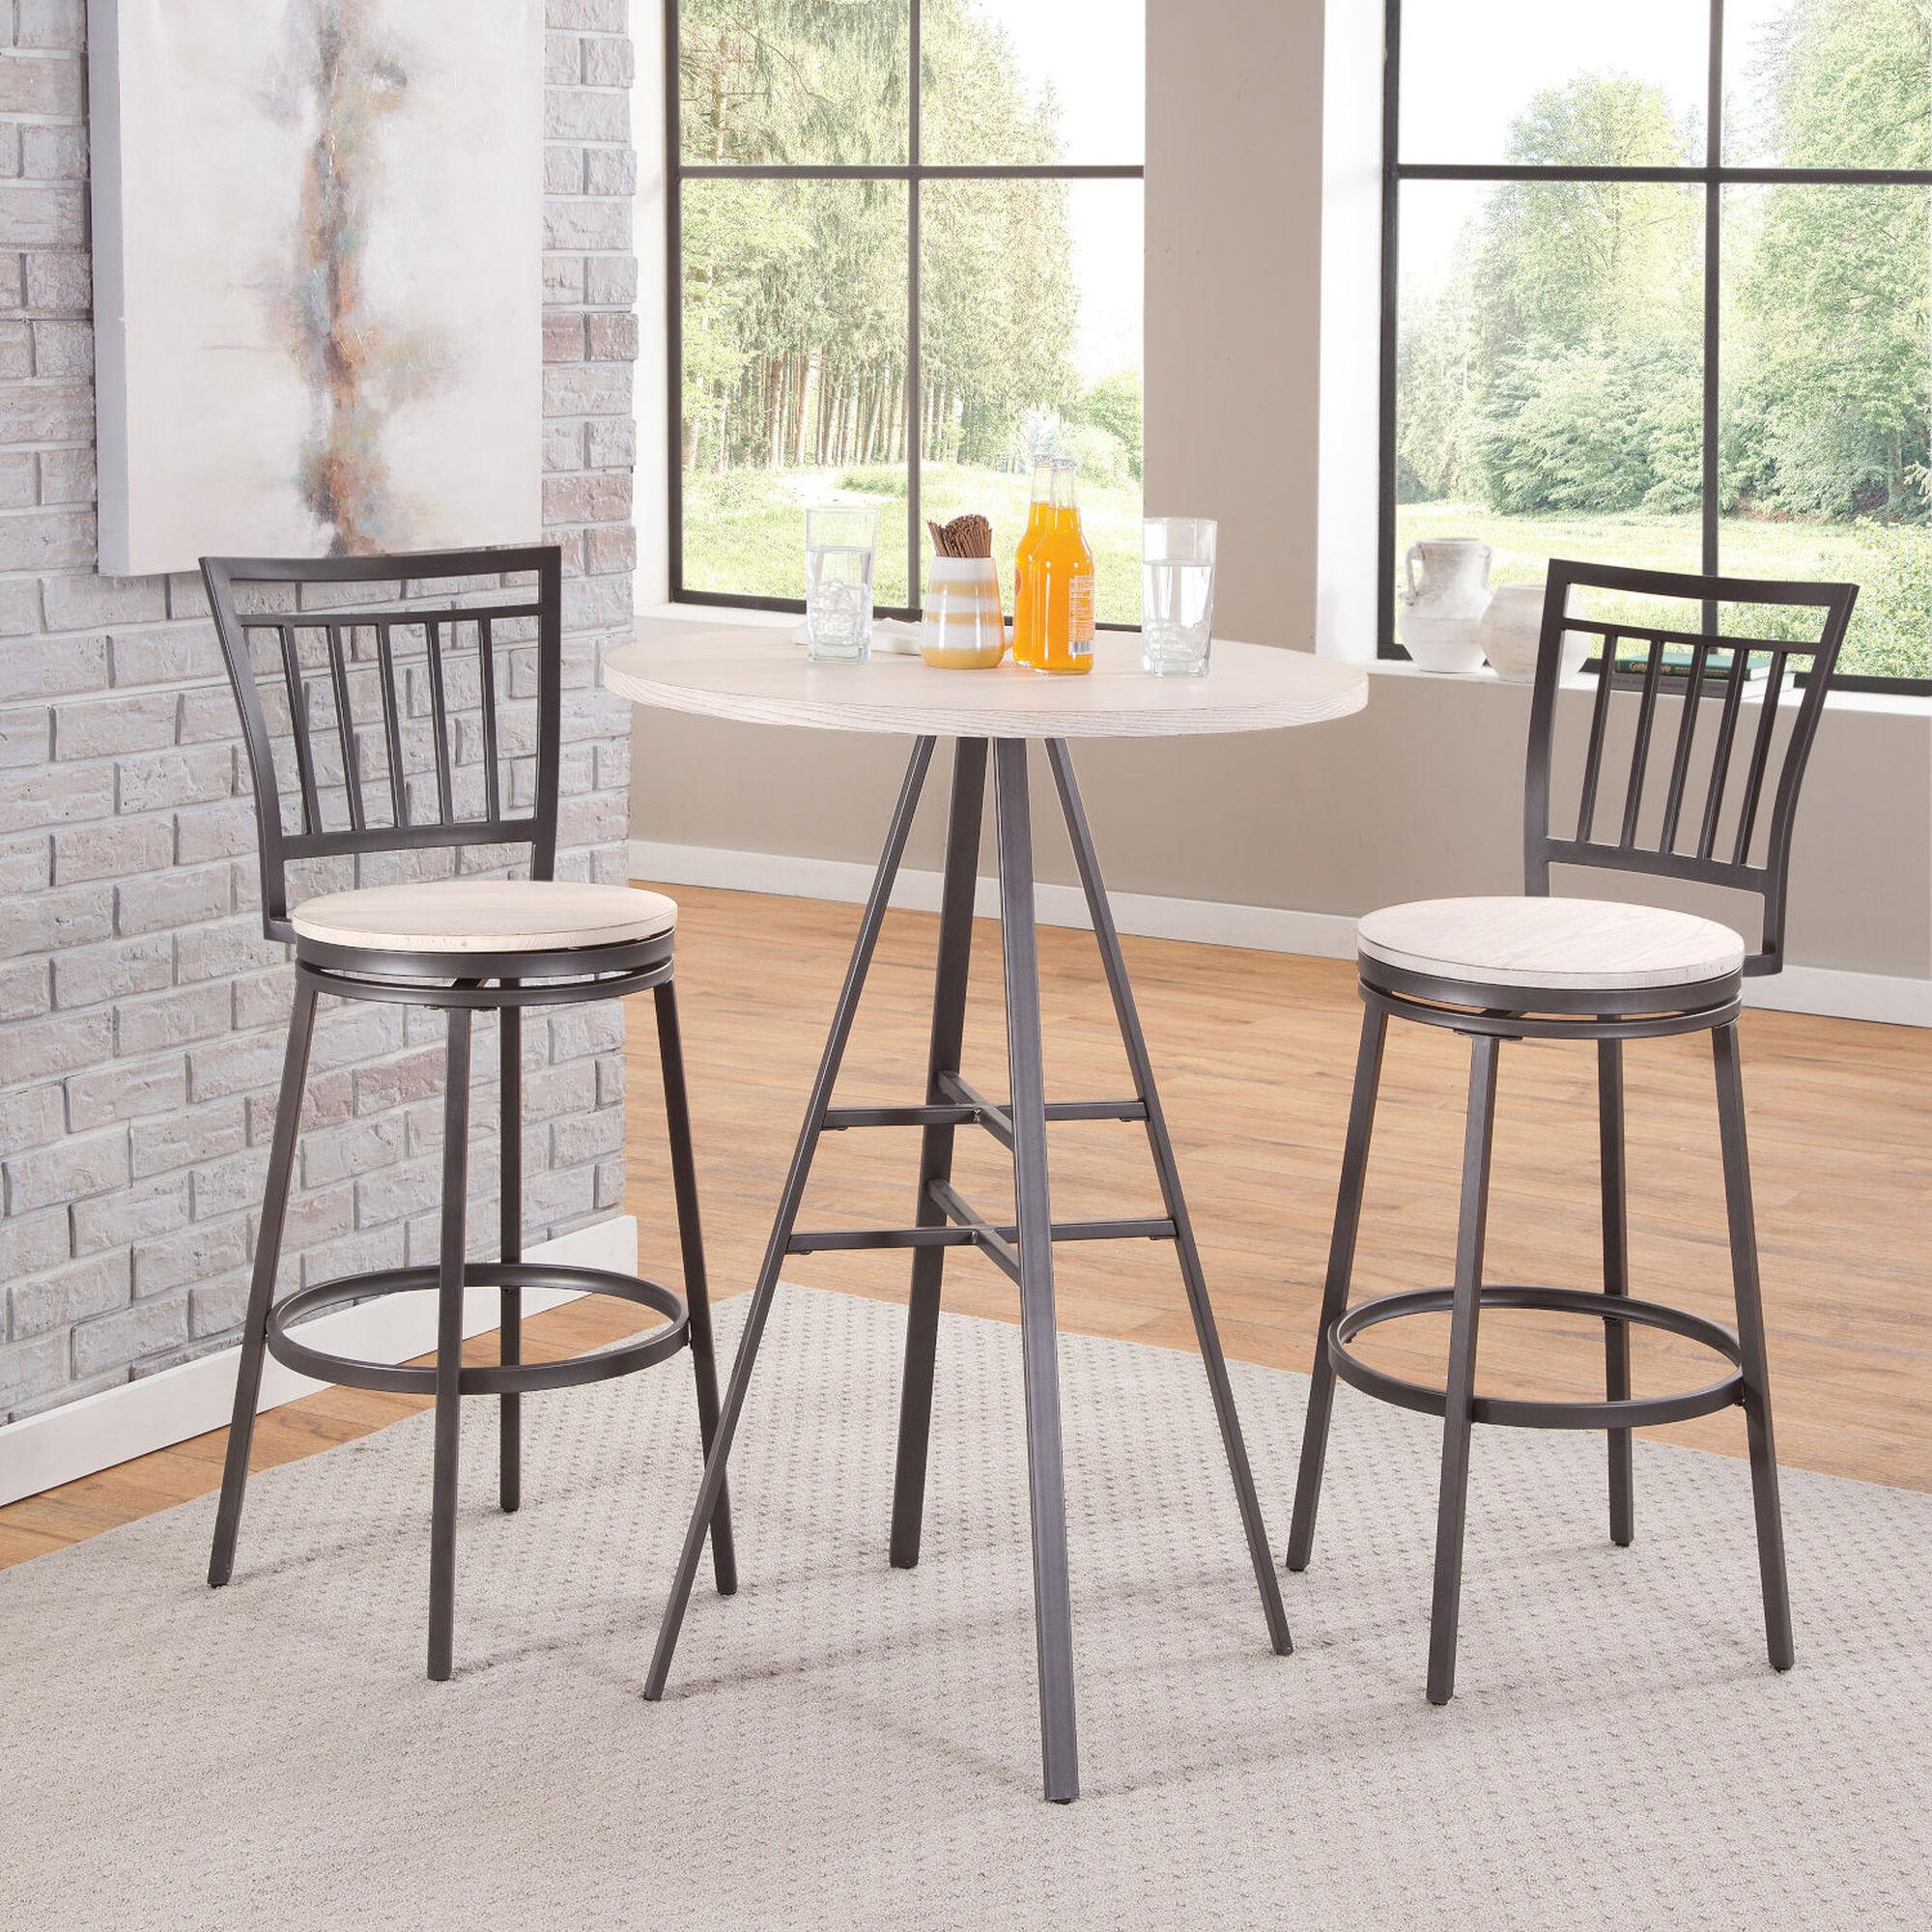 Contemporary Pub Table Set JACEY P1-131-B1-131-3PC in whitewash, Gray 